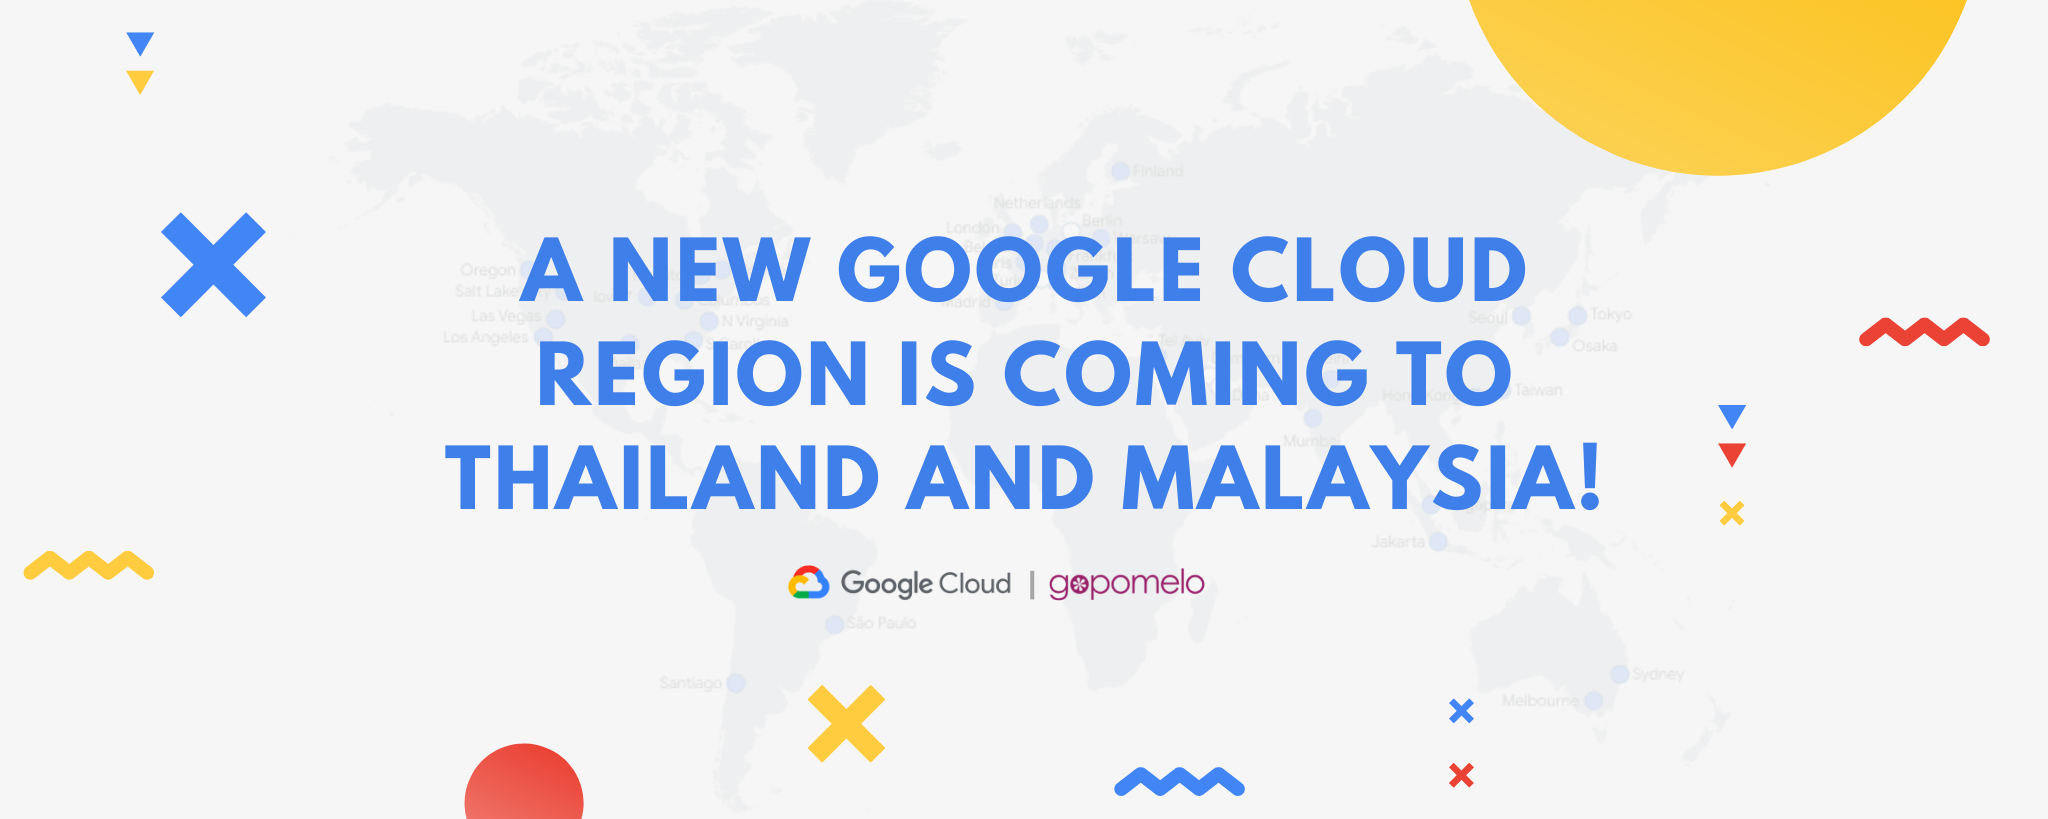 The New Google Cloud Region is Coming to Thailand! | GoPomelo